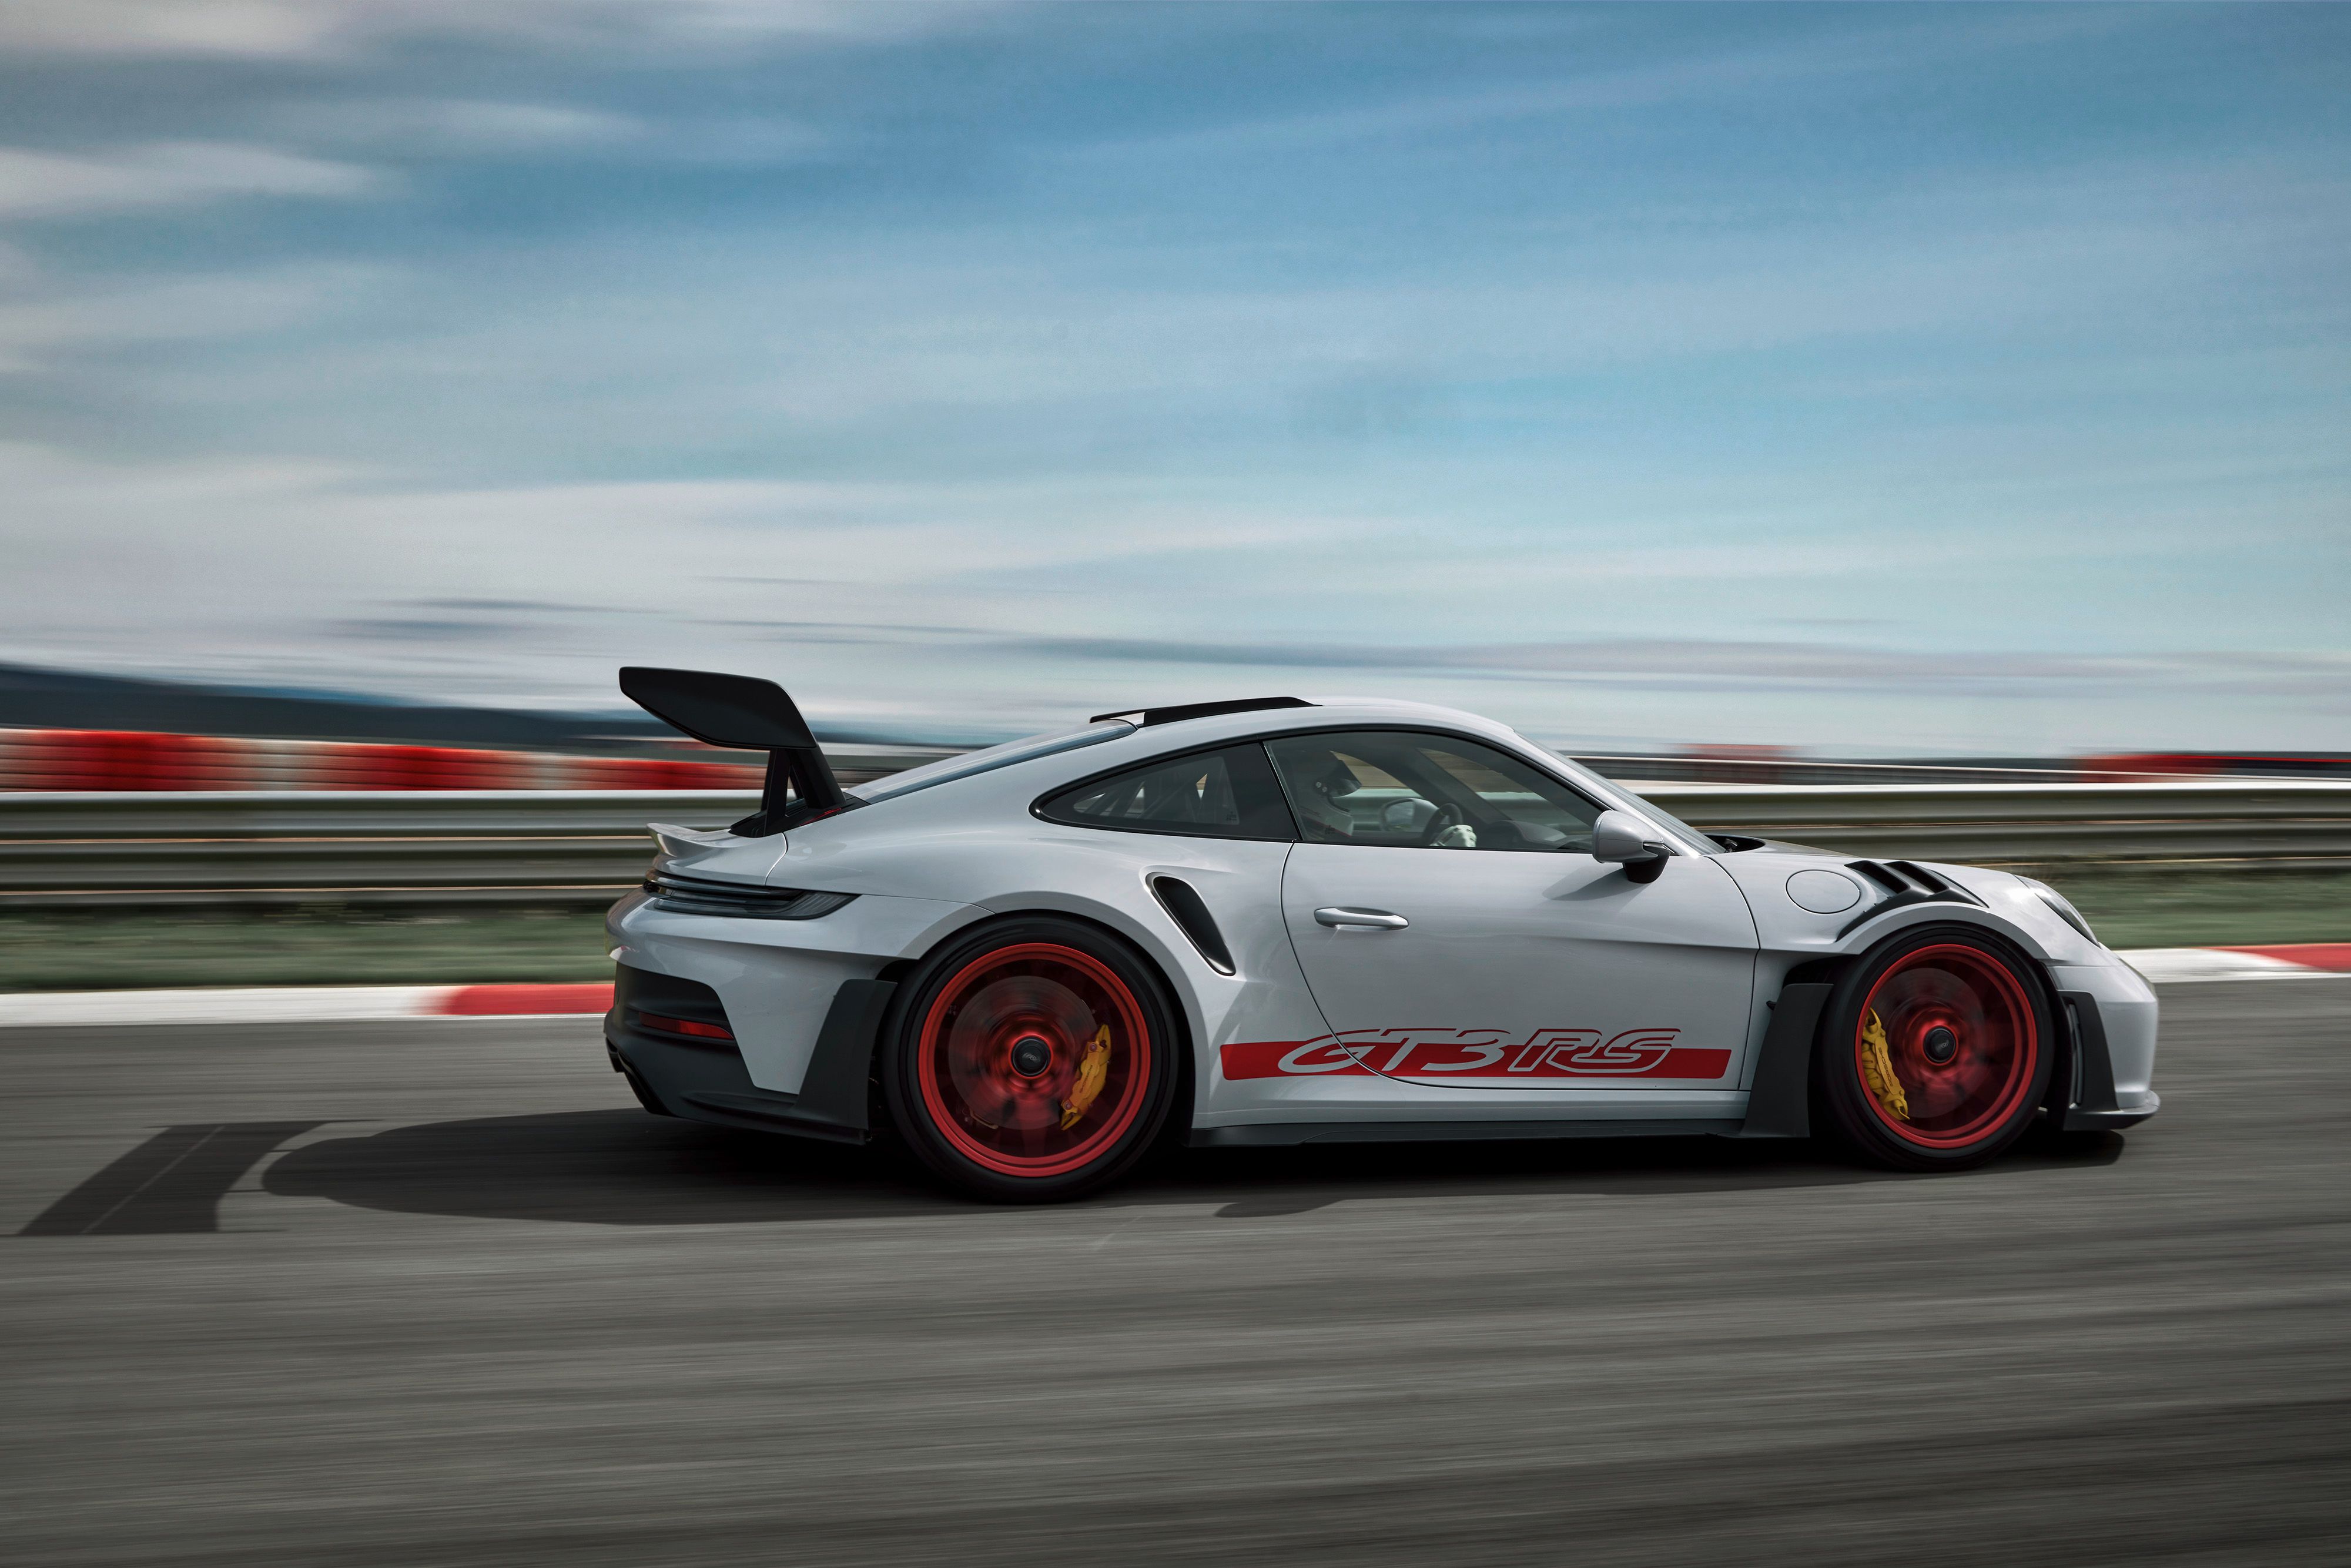 The New Porsche GT3 RS Why No Nürburgring Lap Time?